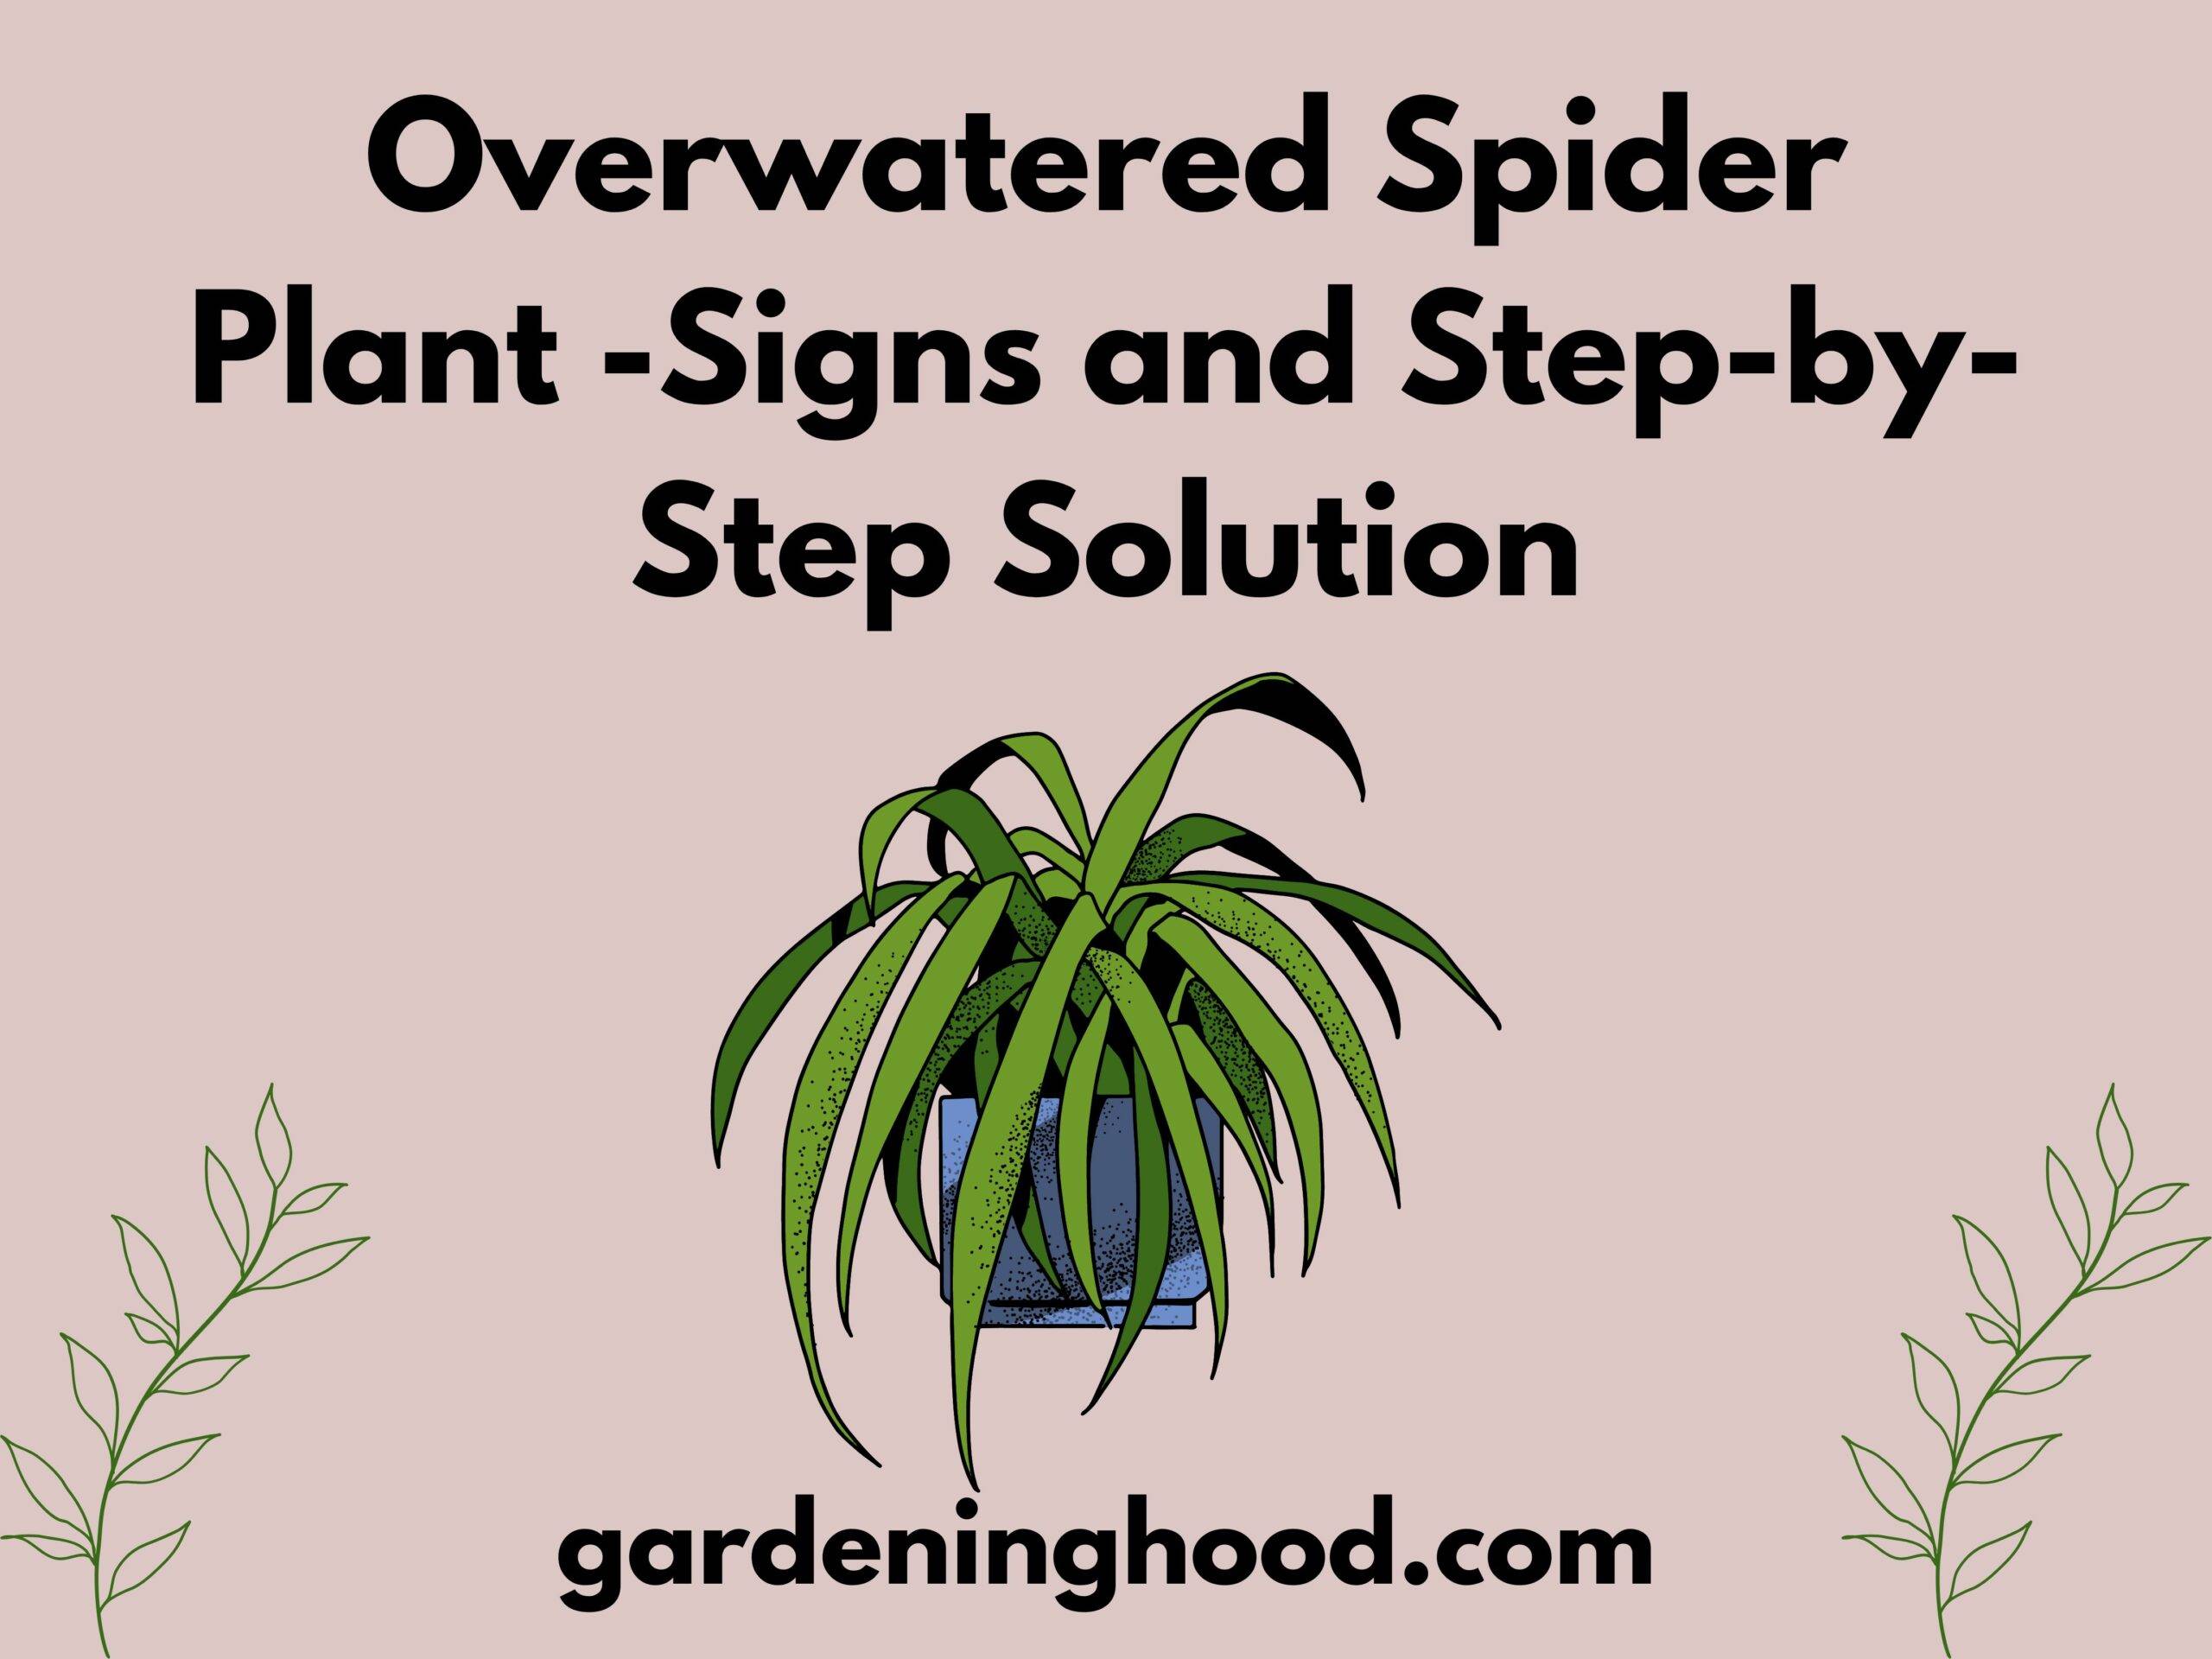 Overwatered Spider Plant -Signs and Step-by-Step Solution